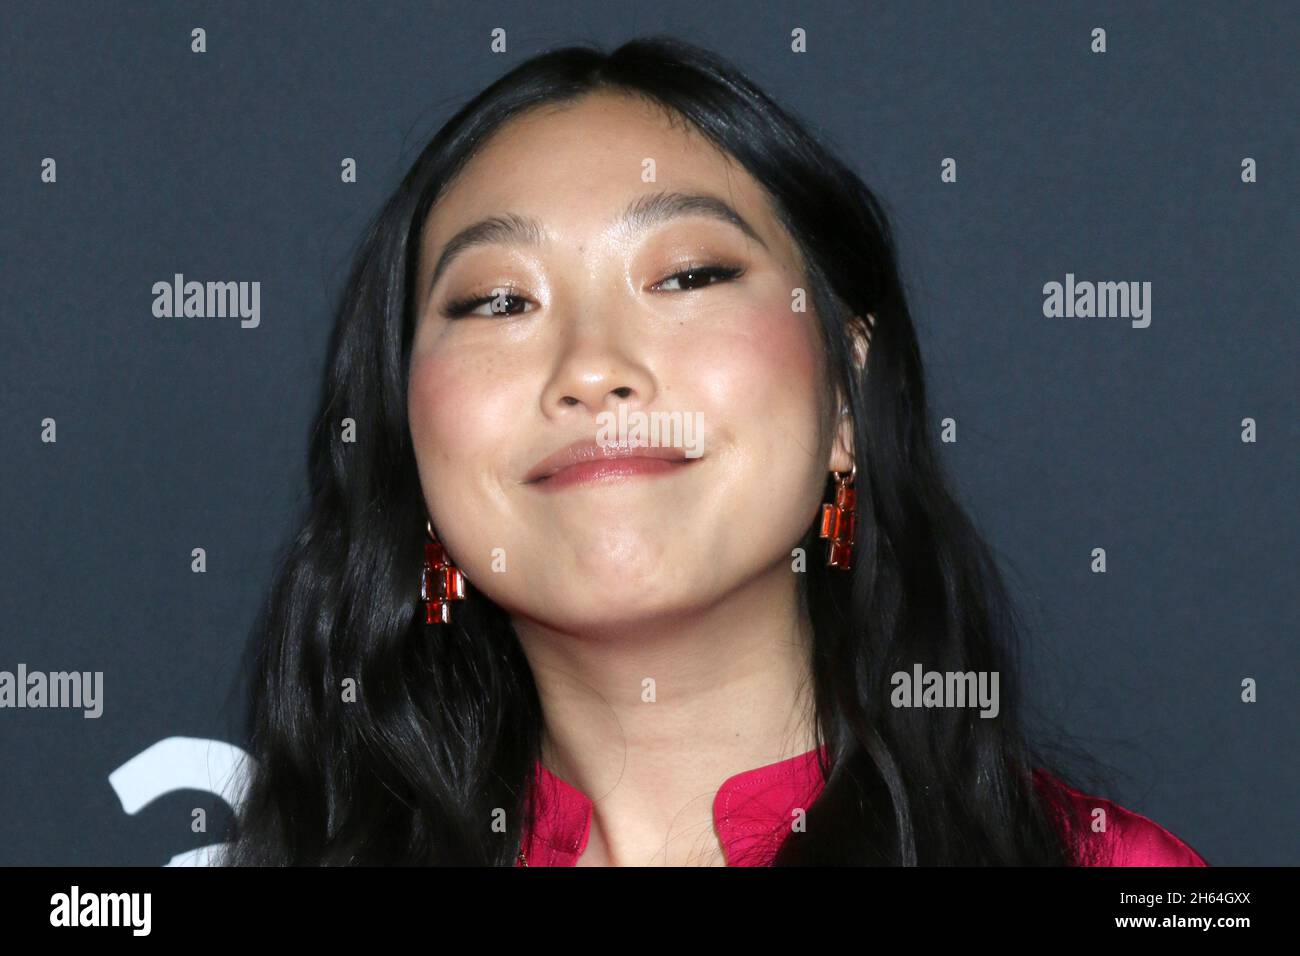 LOS ANGELES - NOV 12: Awkwafina at the AFI Fest - Swan Song Premiere at ...